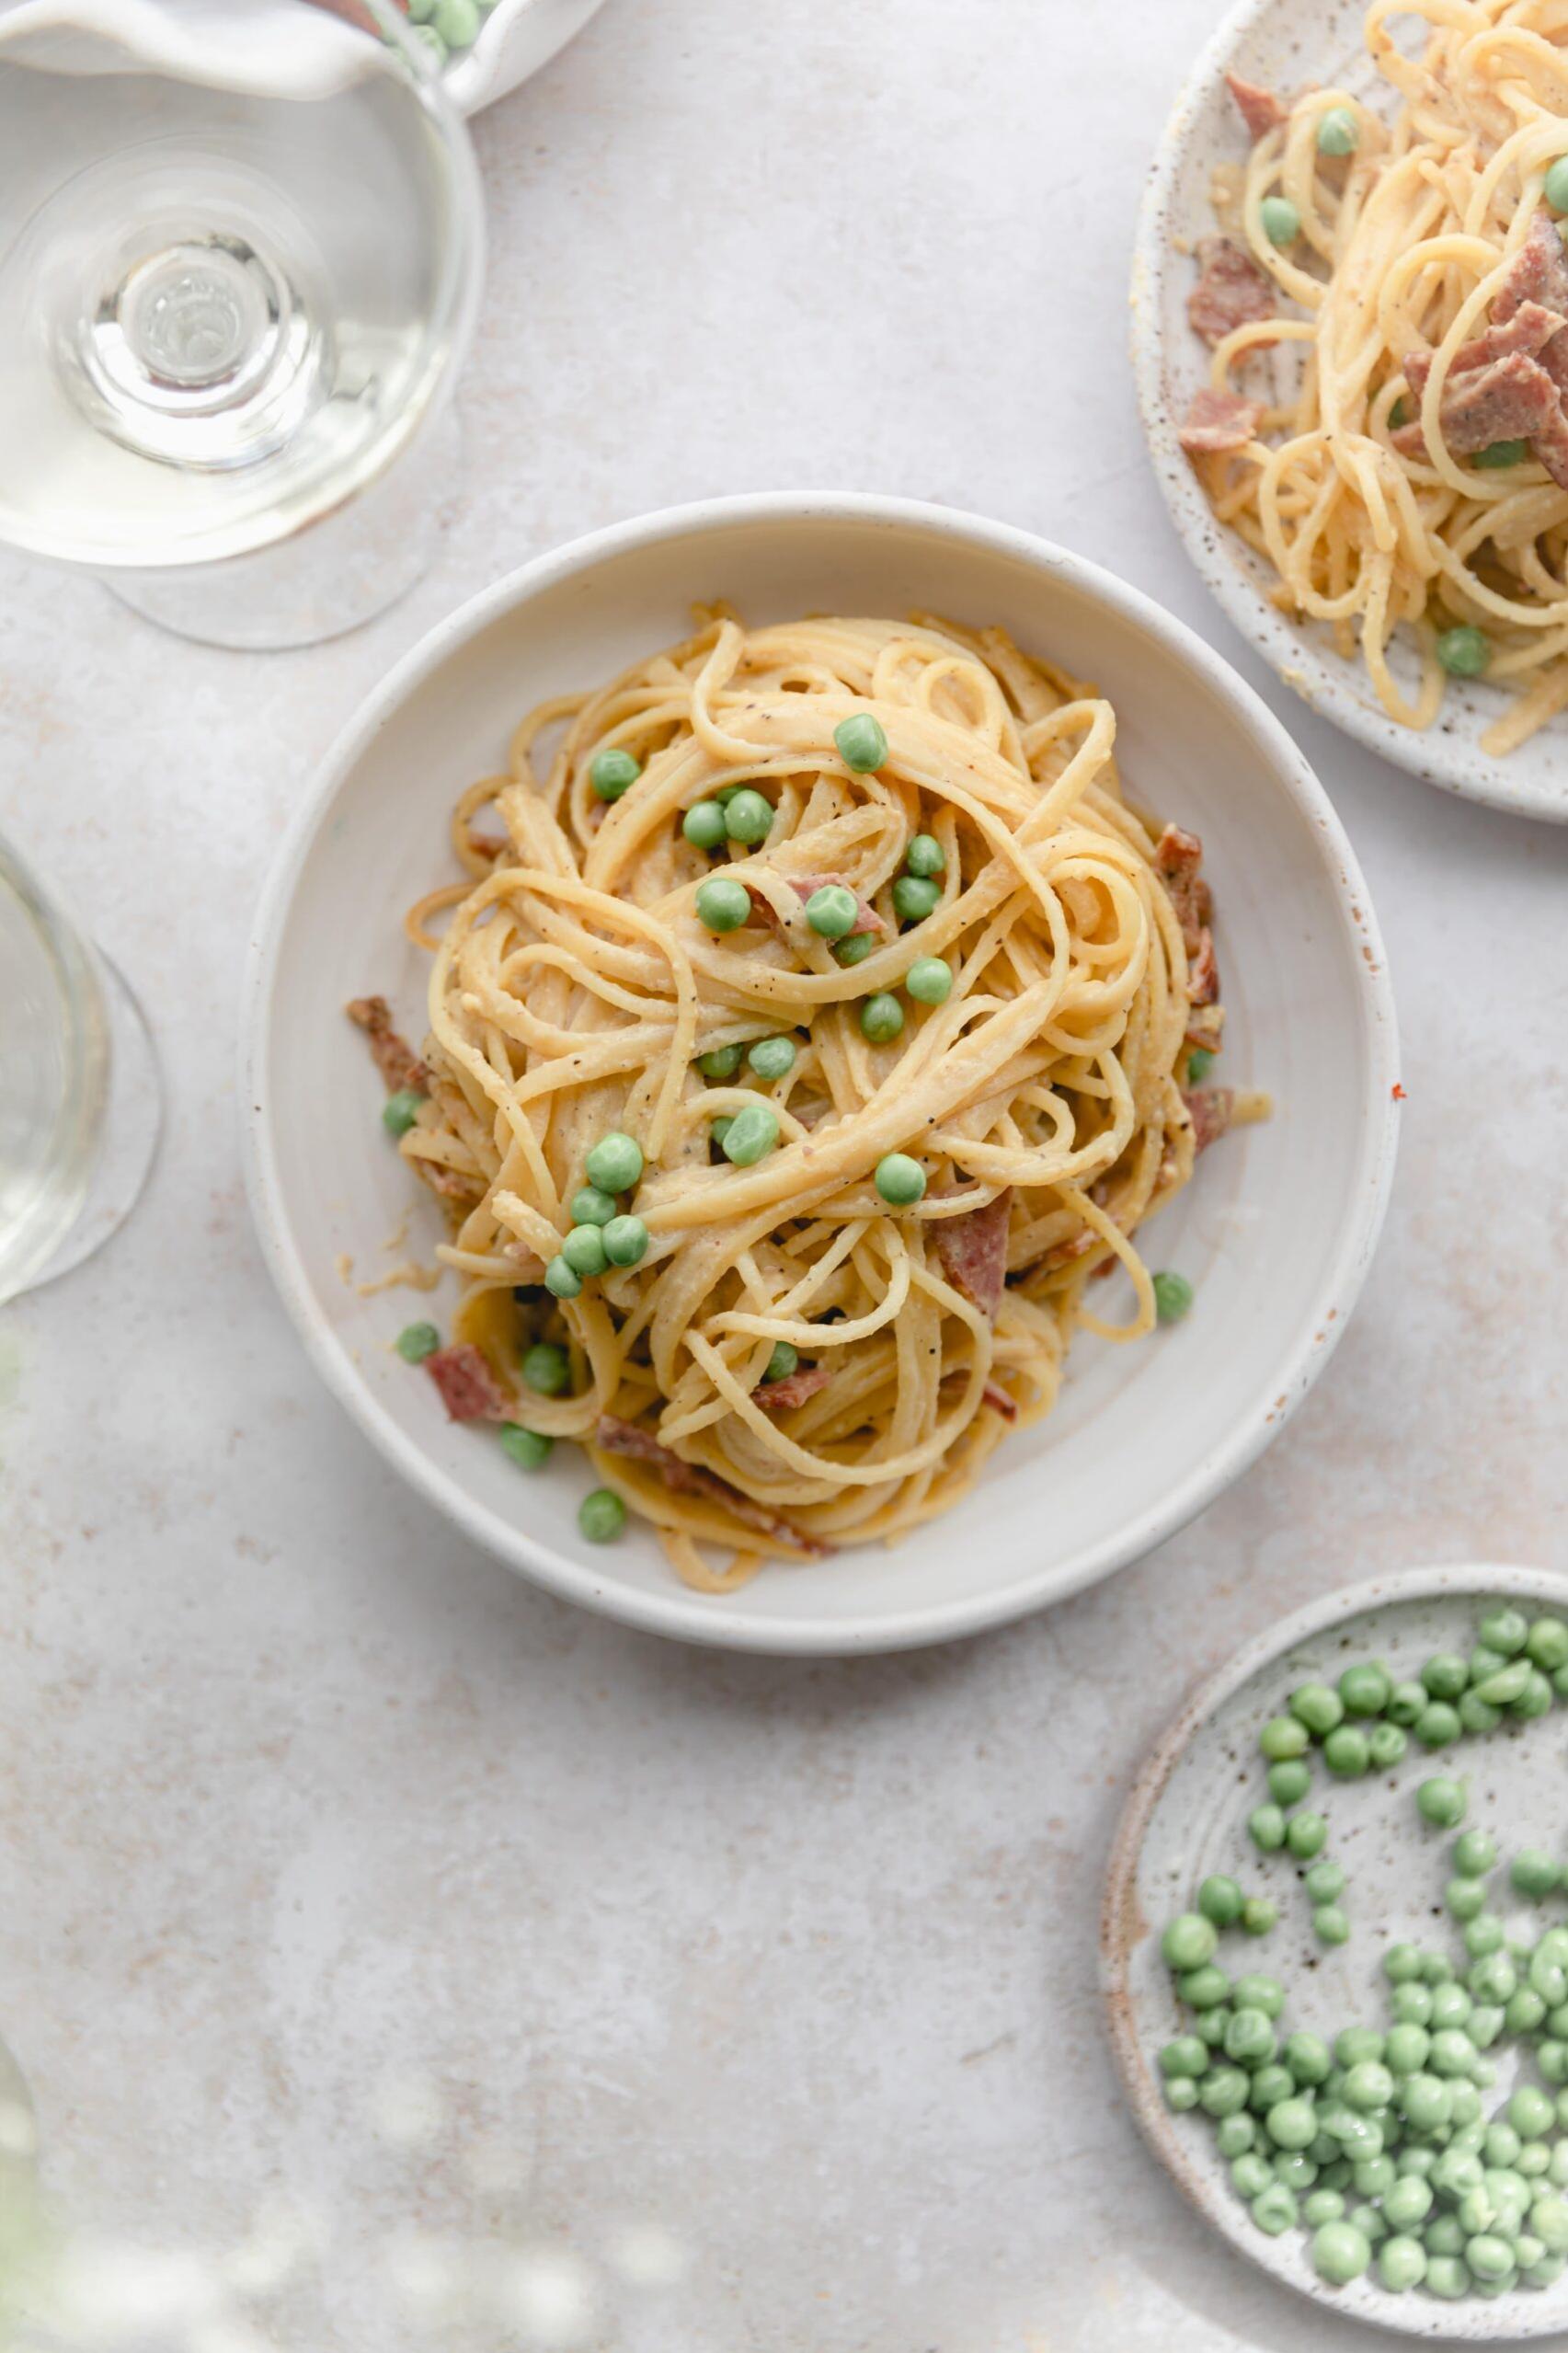  You won't even miss the dairy in this vegan take on the classic carbonara recipe